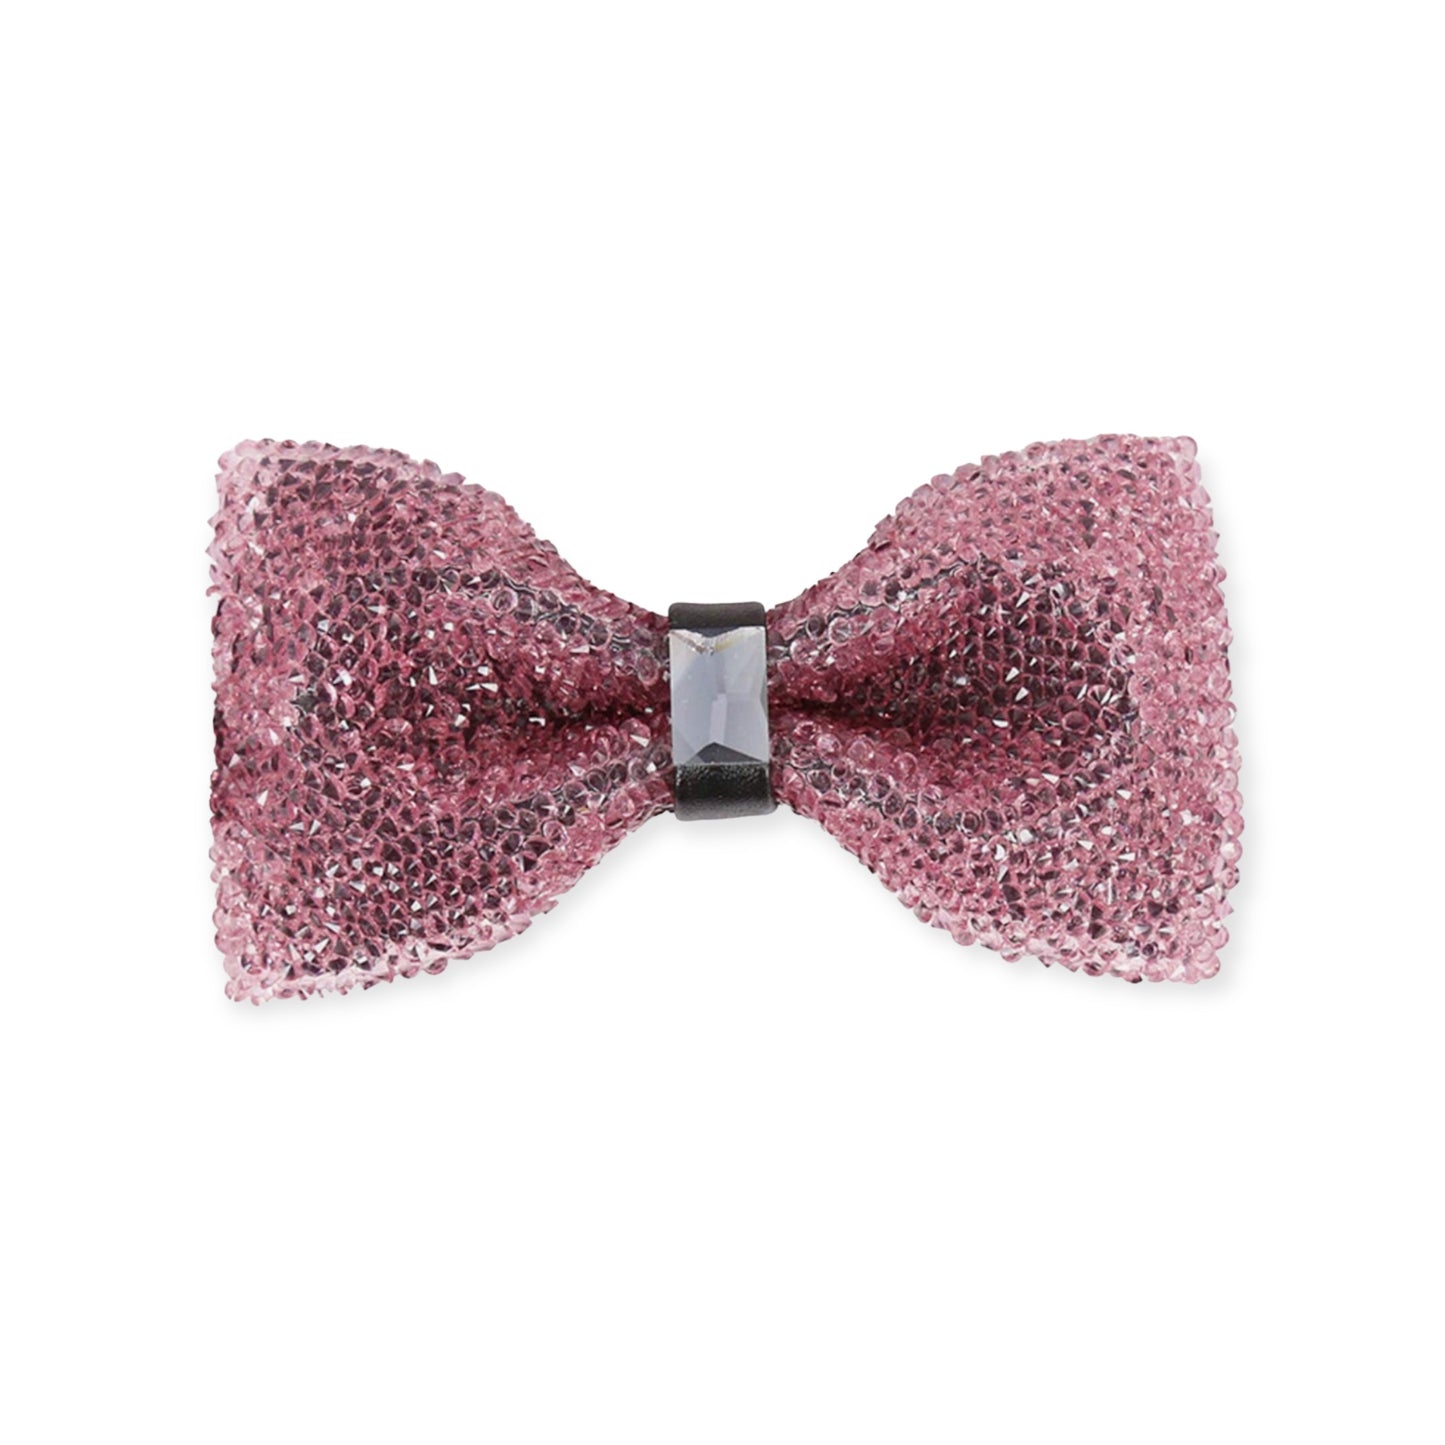 Light Pink Crystal Bow Tie